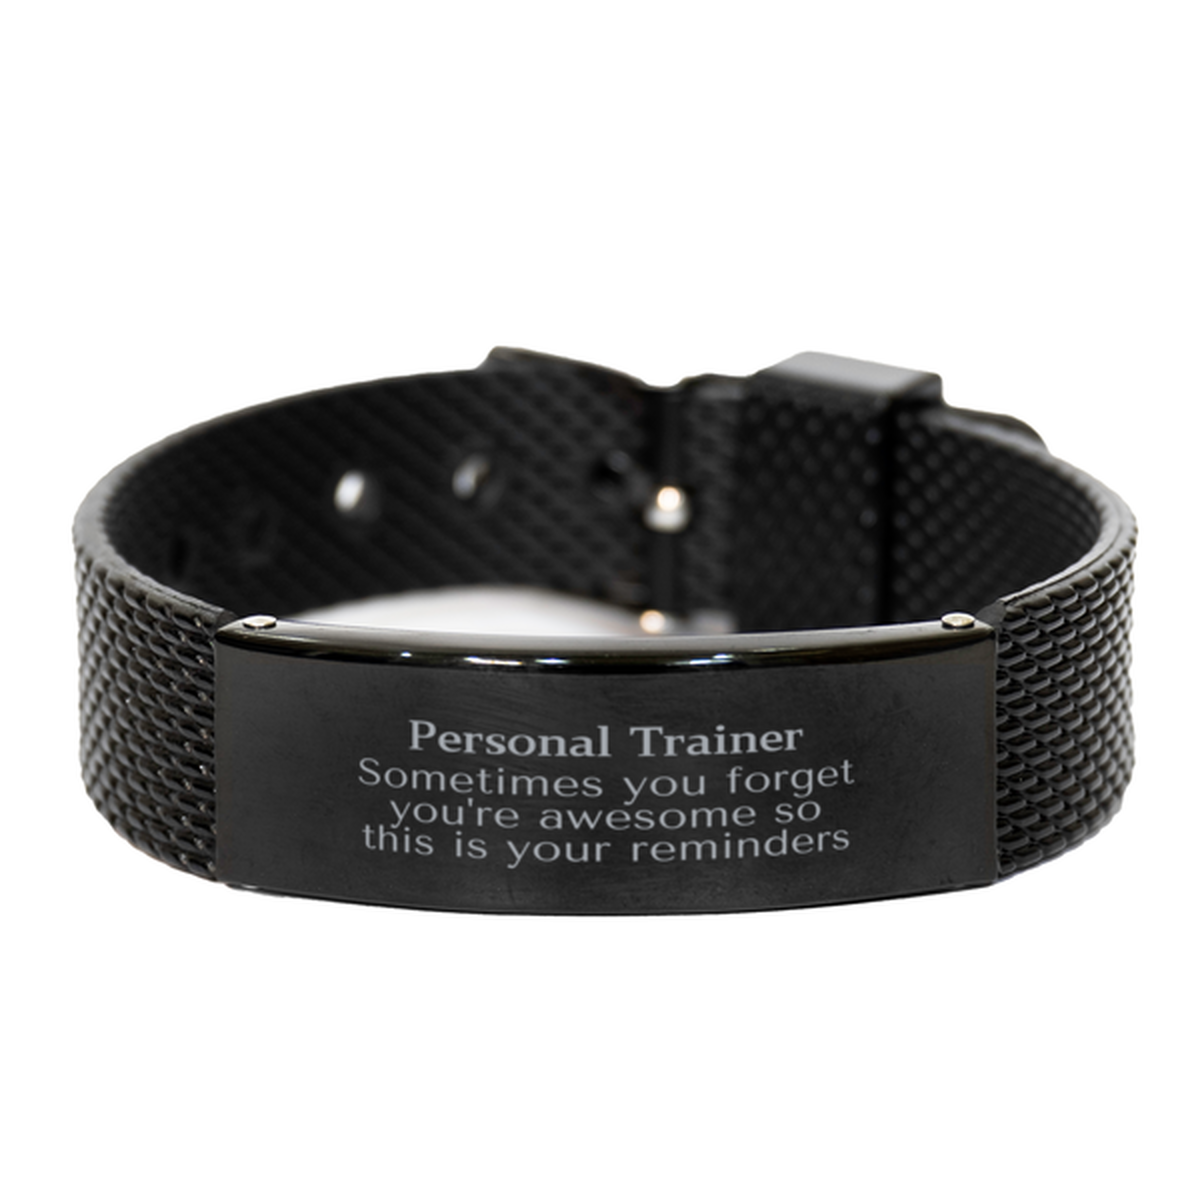 Sentimental Personal Trainer Black Shark Mesh Bracelet, Personal Trainer Sometimes you forget you're awesome so this is your reminders, Graduation Christmas Birthday Gifts for Personal Trainer, Men, Women, Coworkers